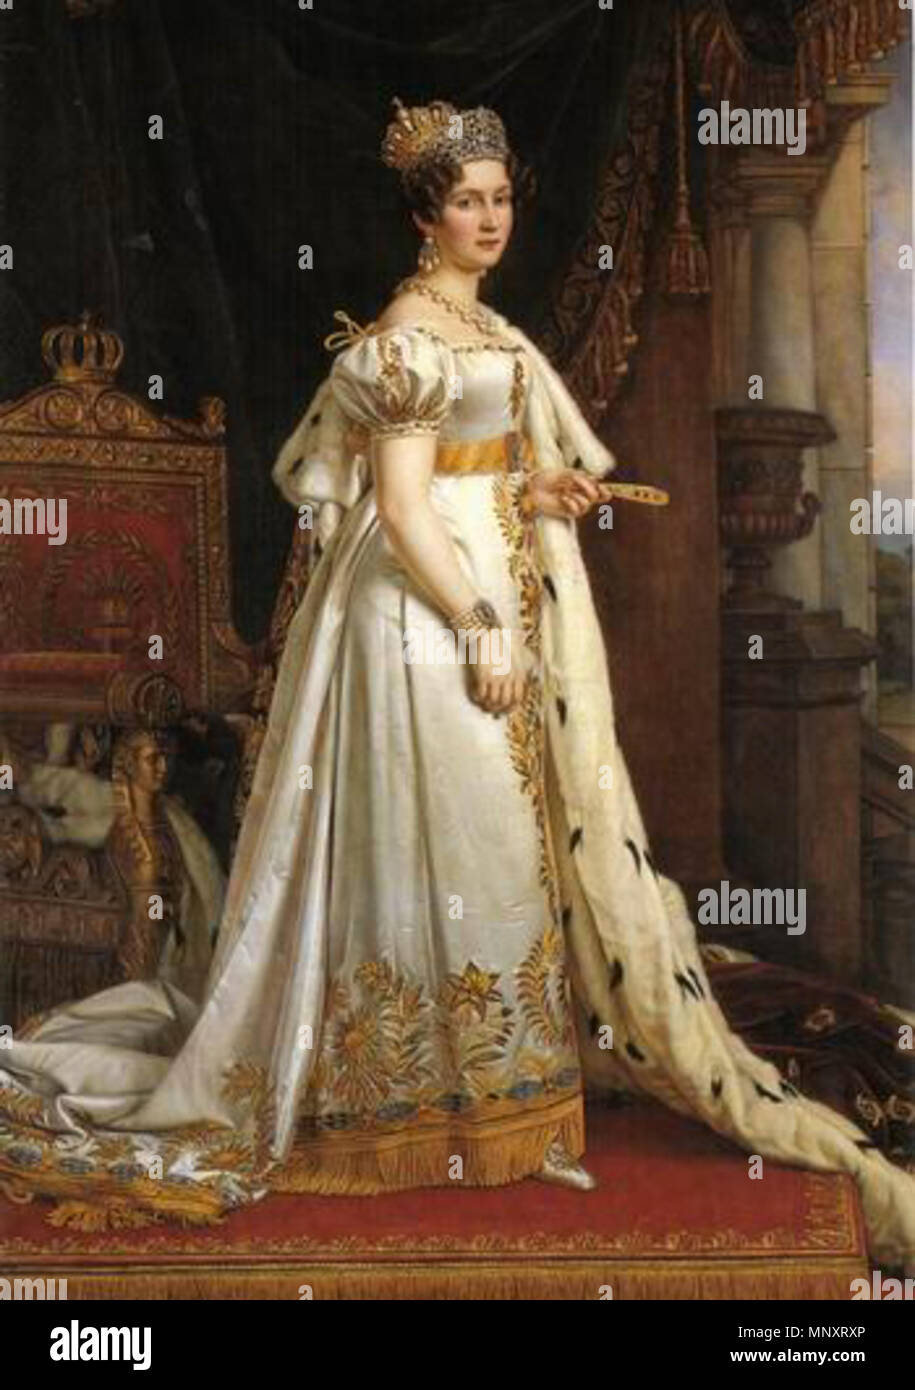 Q30067593 . Therese of Saxe-Hildburghausen (1792-1854), Queen of Bavaria . 1826.   1186 Therese of Saxe-Hildburghausen, by Joseph Stieler Stock Photo